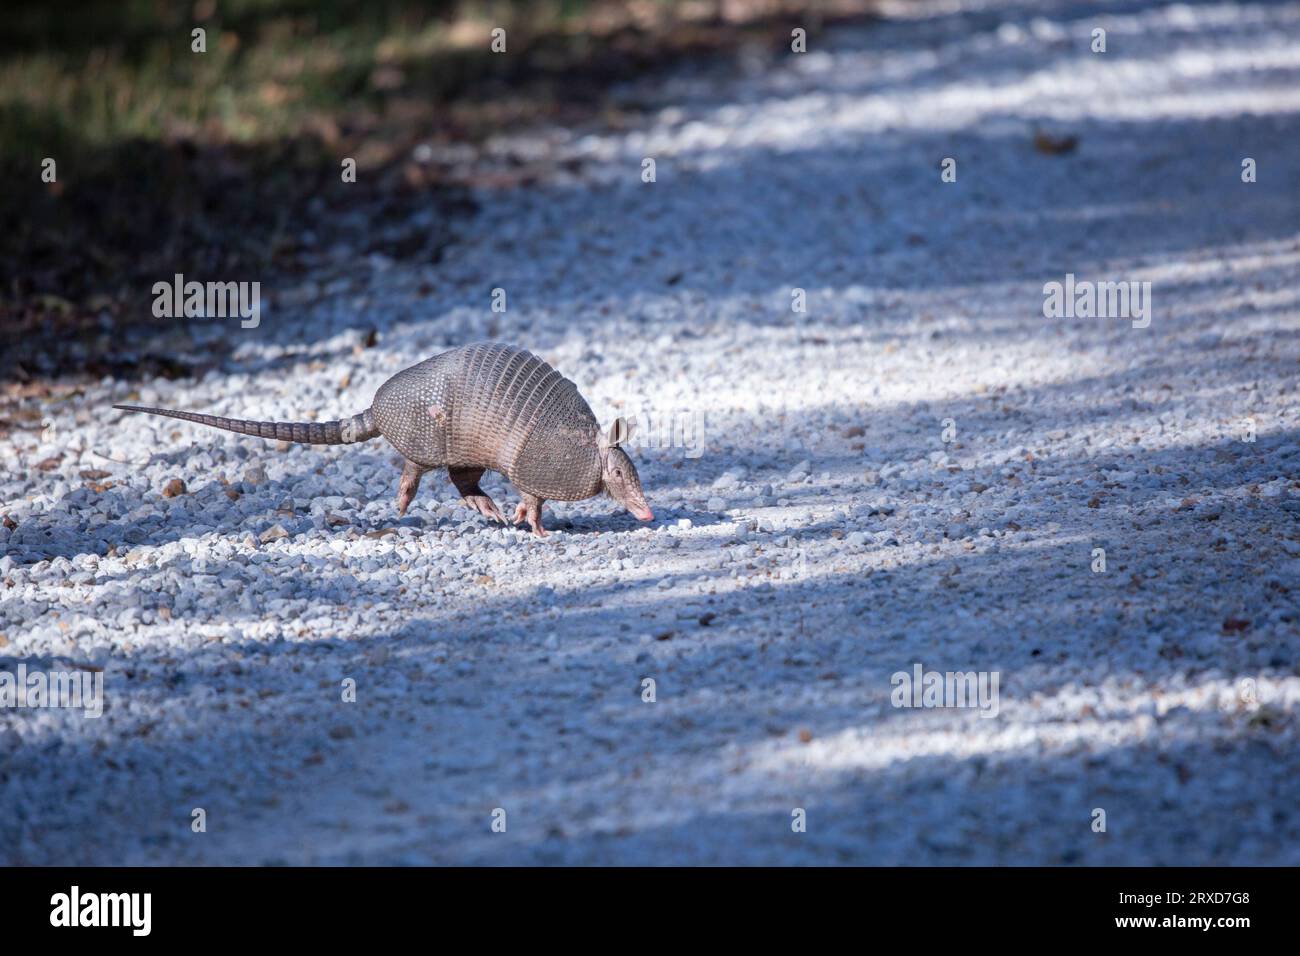 Nine-banded armadillo (Dasypus novemcinctus) landing as it hops across a gravel road with all four feet visible Stock Photo